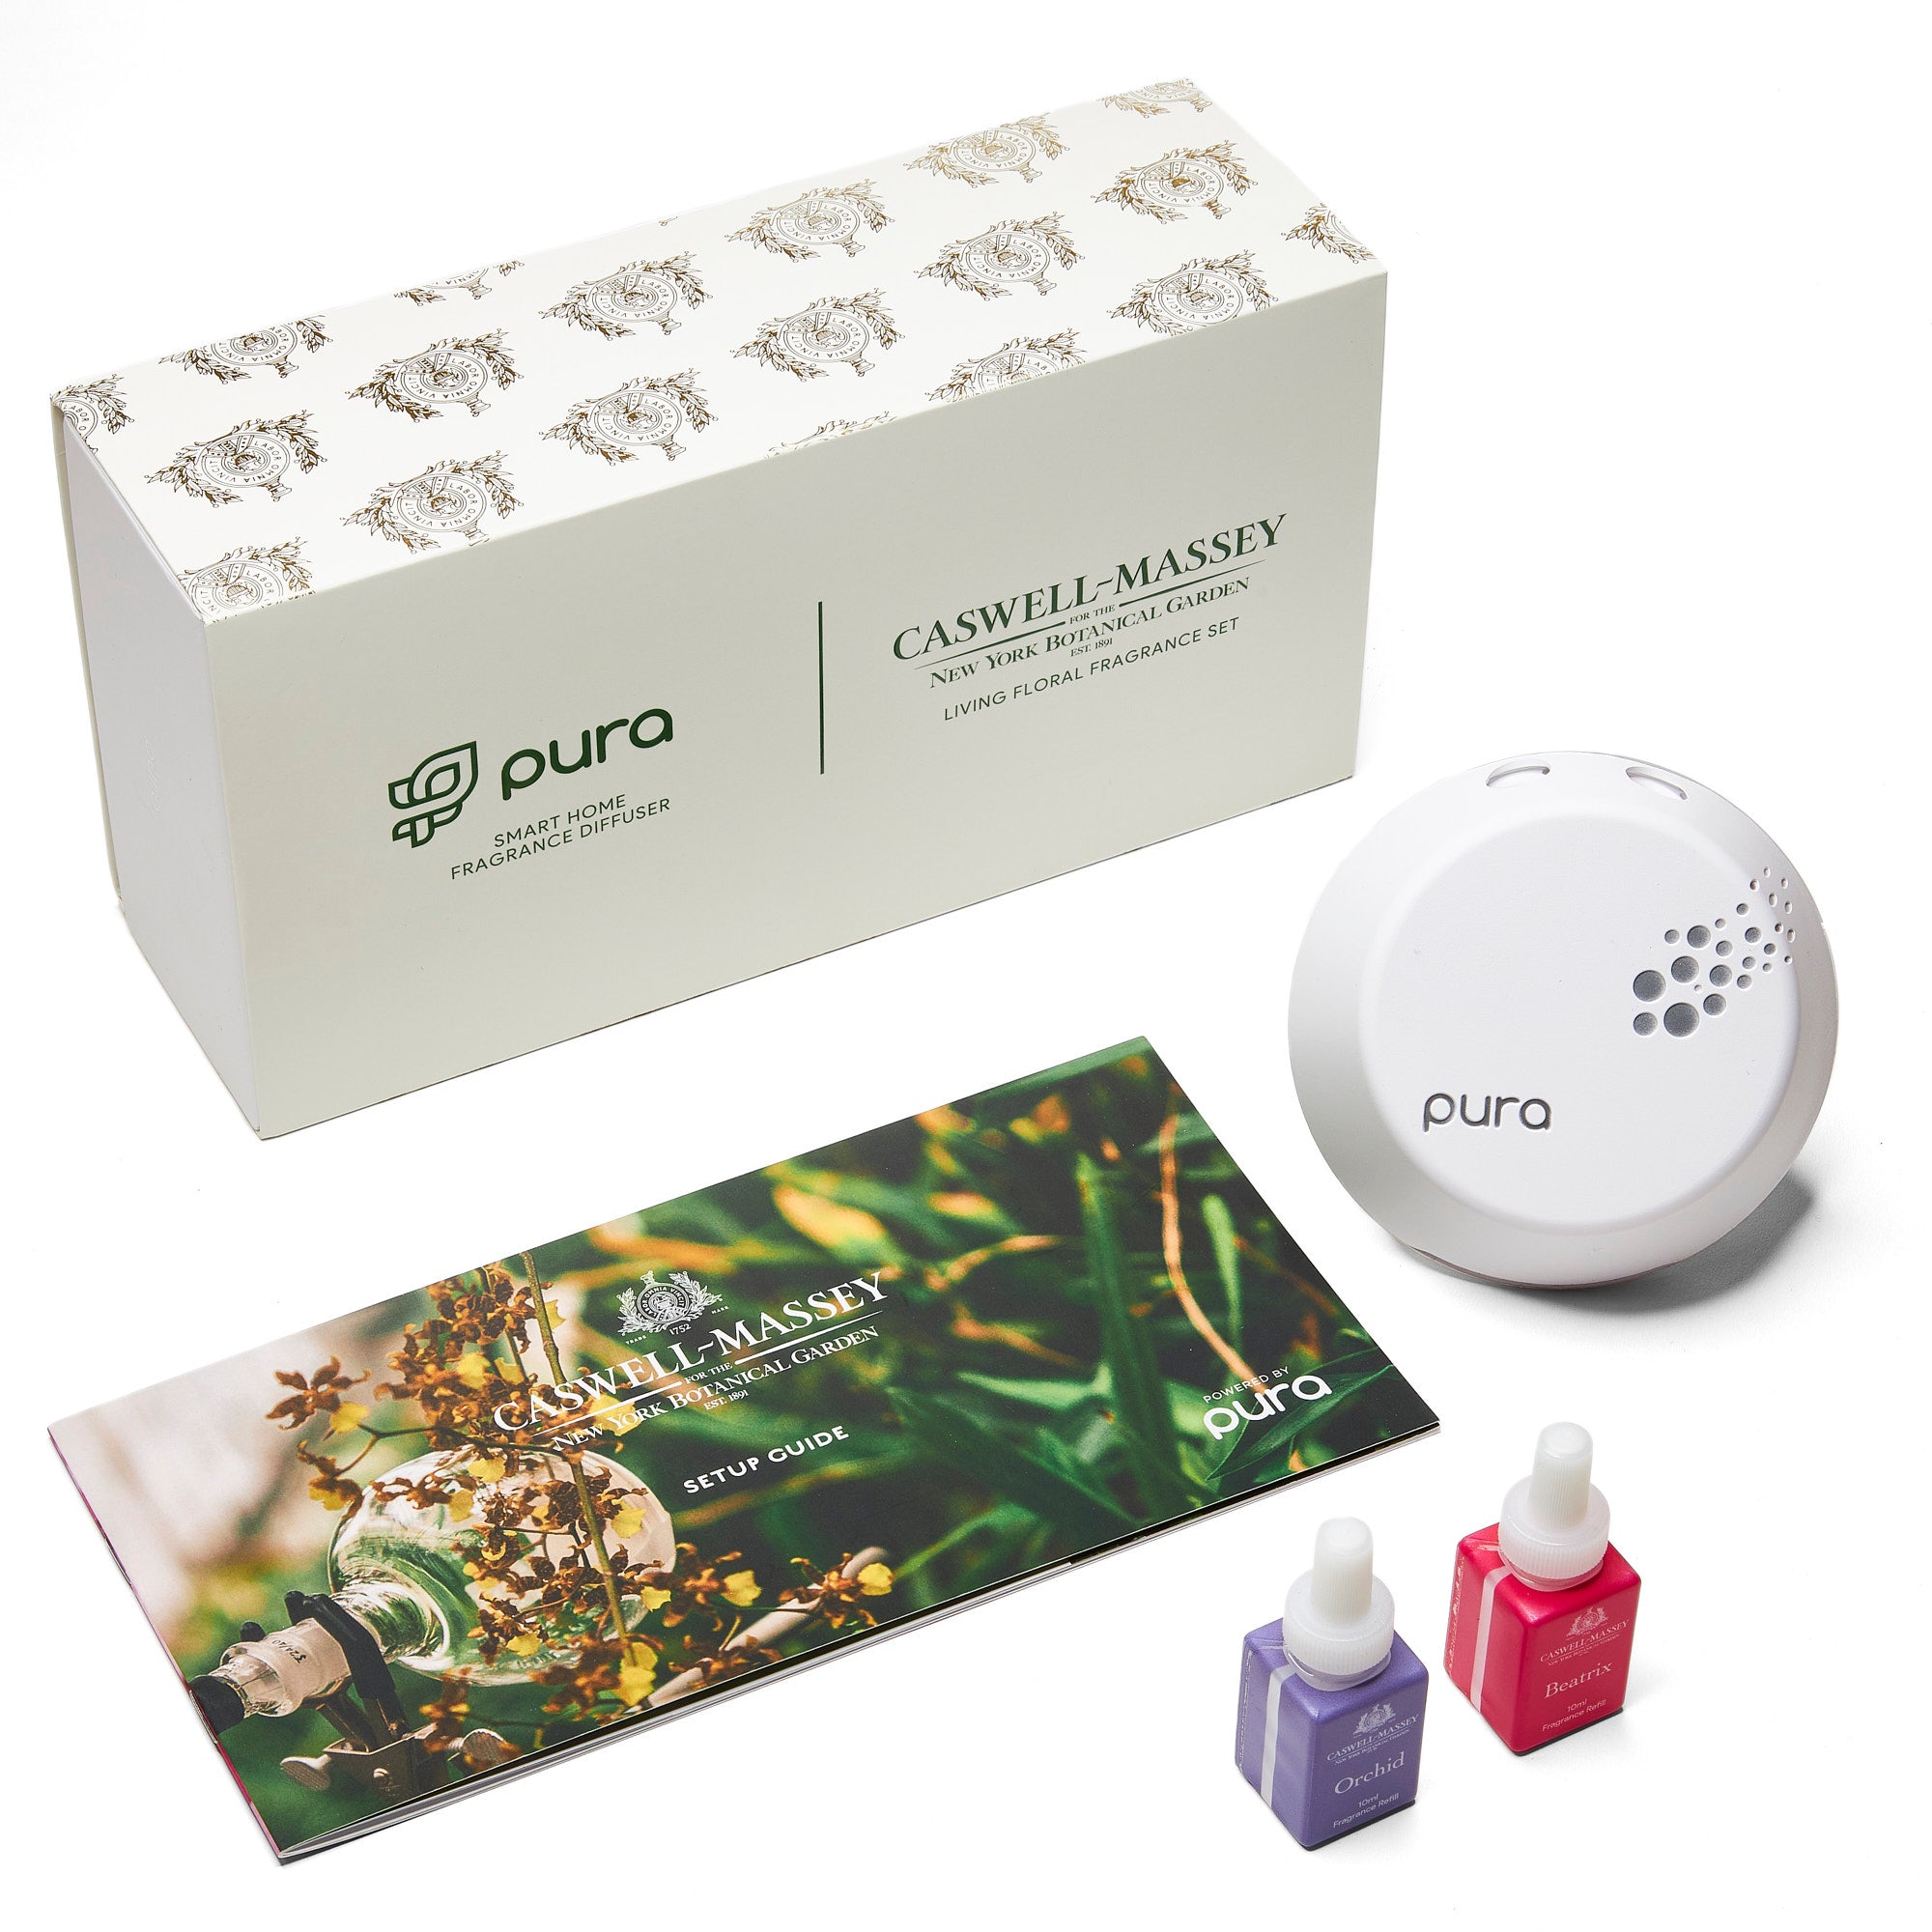 NYBG Pura Living Floral Fragrance Set: shown with user guide, pura plug-in device, and two fragrance vials of Orchid and Honeysuckle